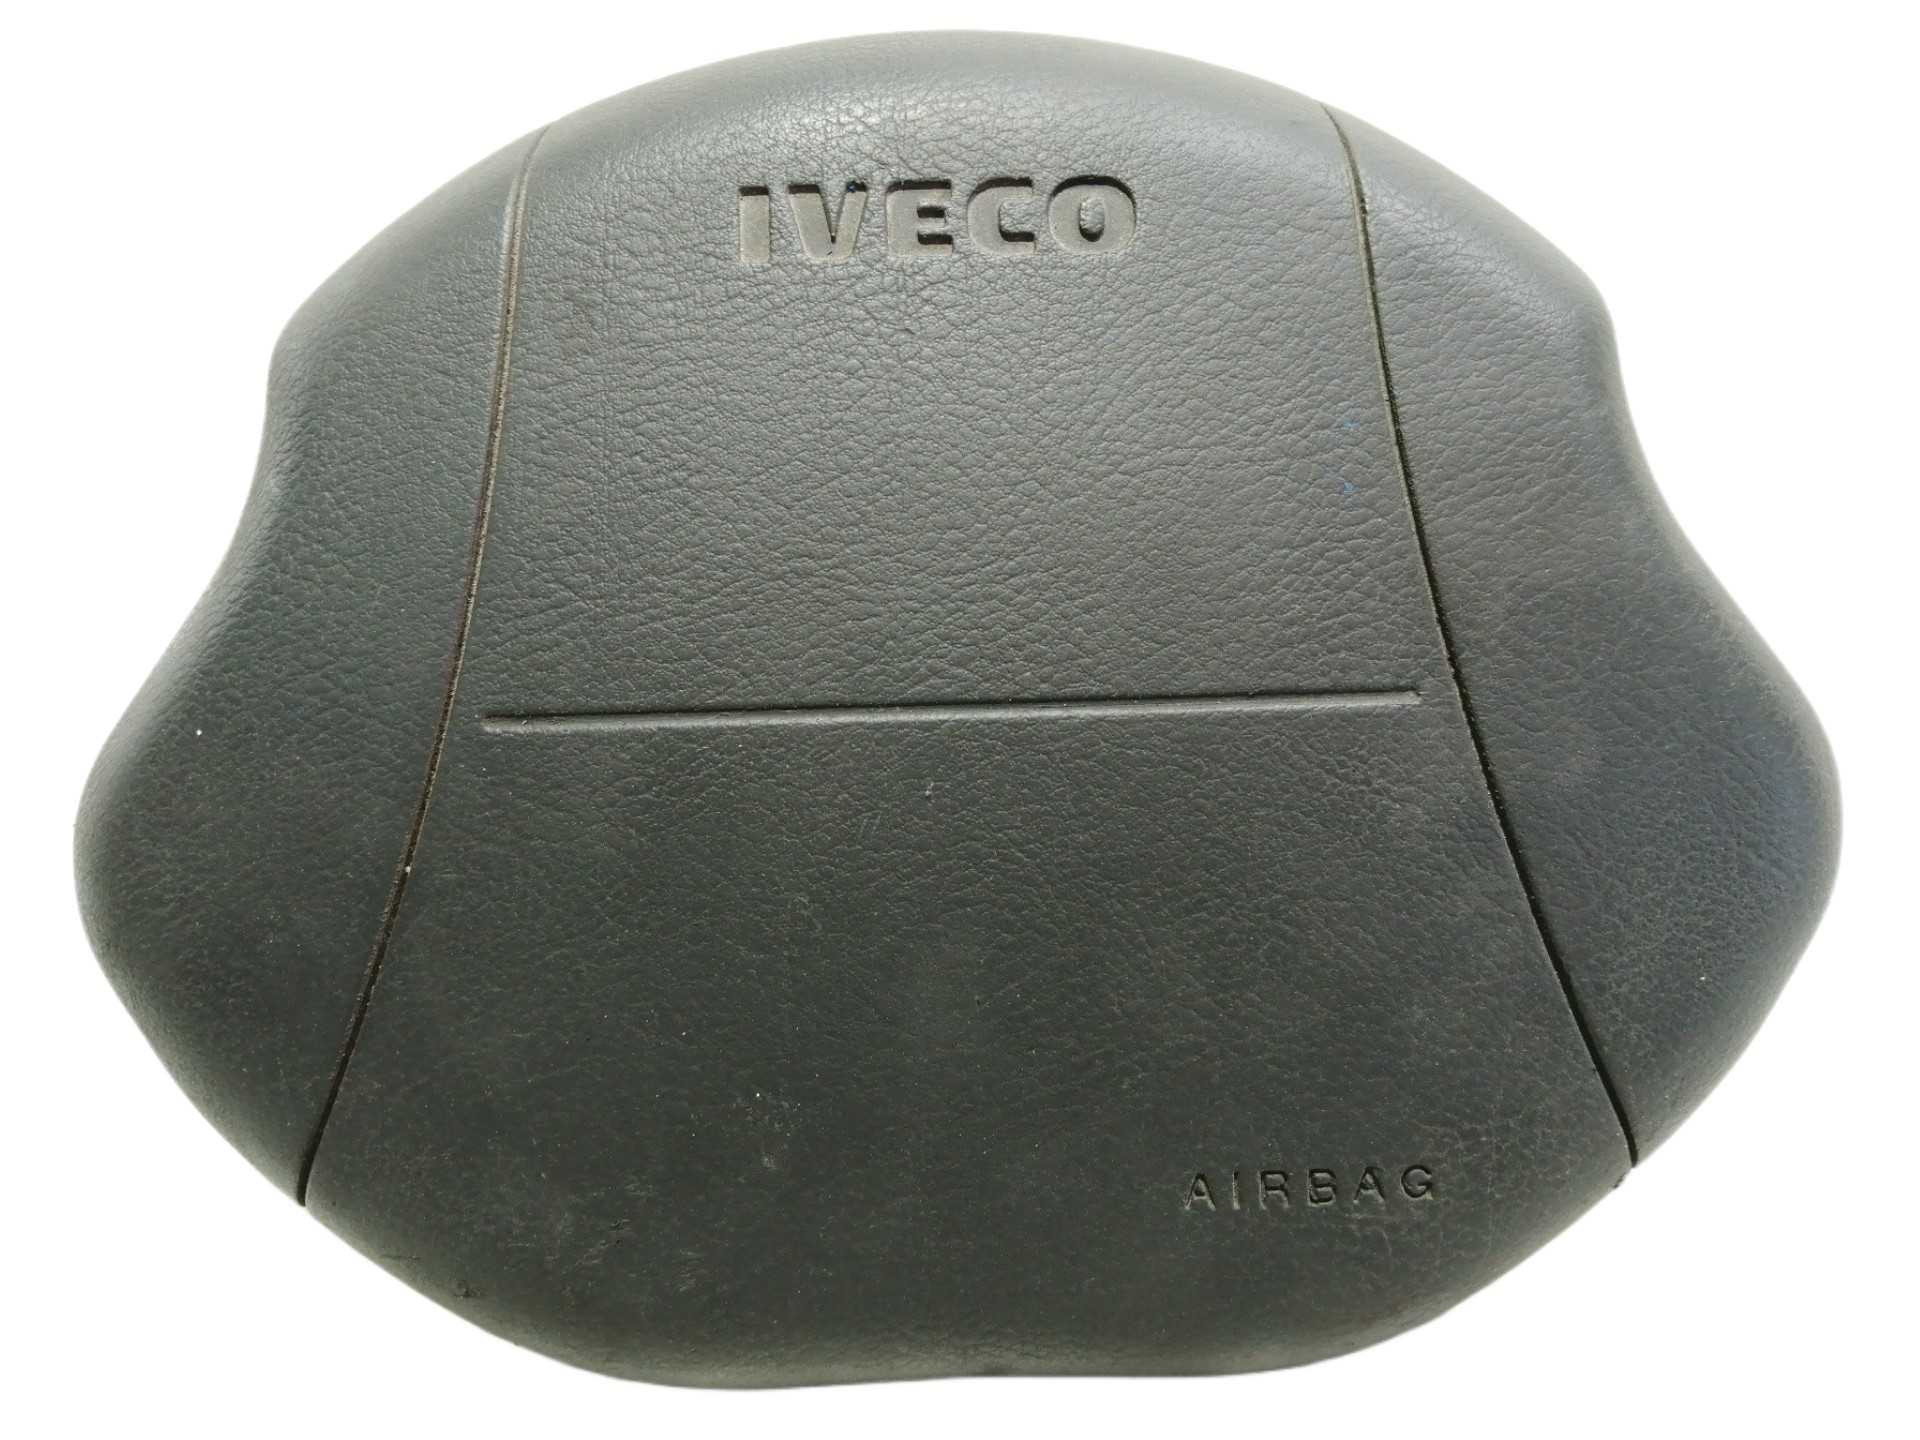 Iveco Algemeen AIRBAG VOLANT 500331825/S001313398/010443120160/30003033A